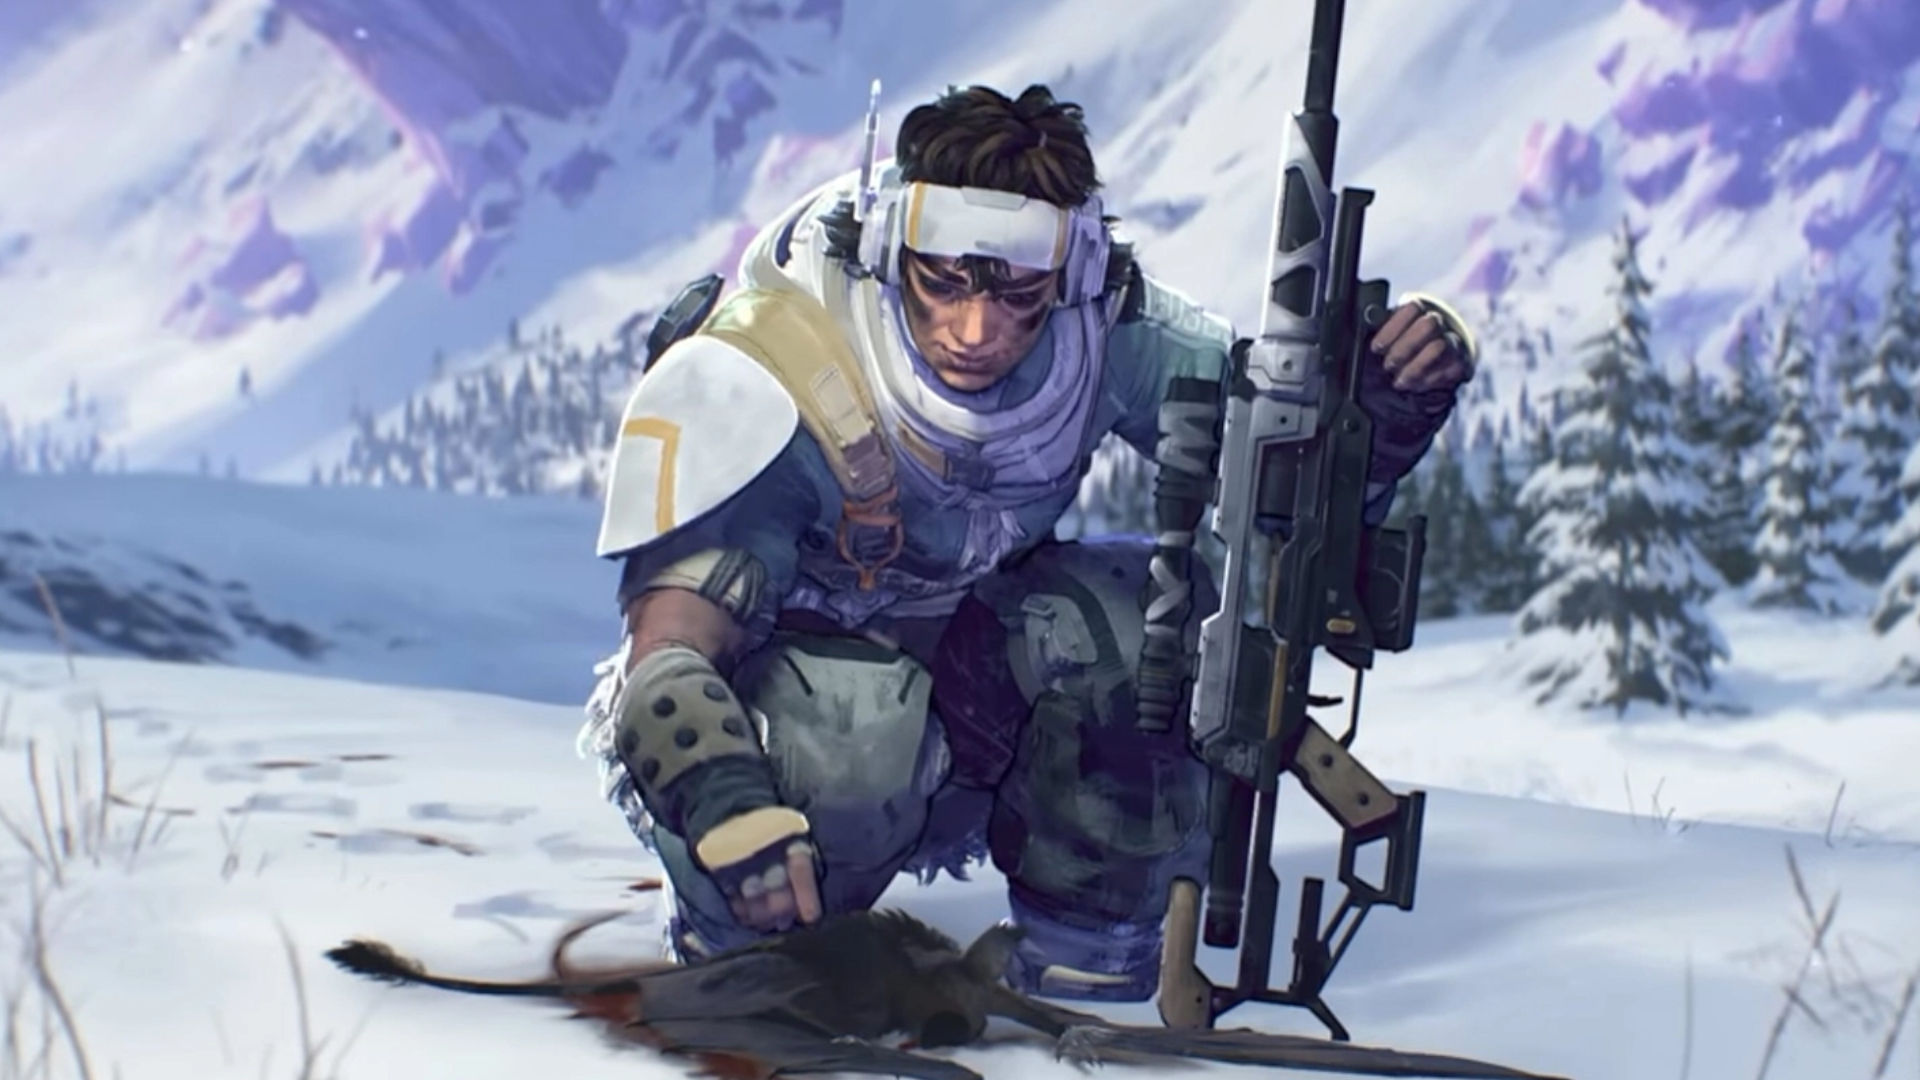 Apex Legends characters list - all champs and abilities